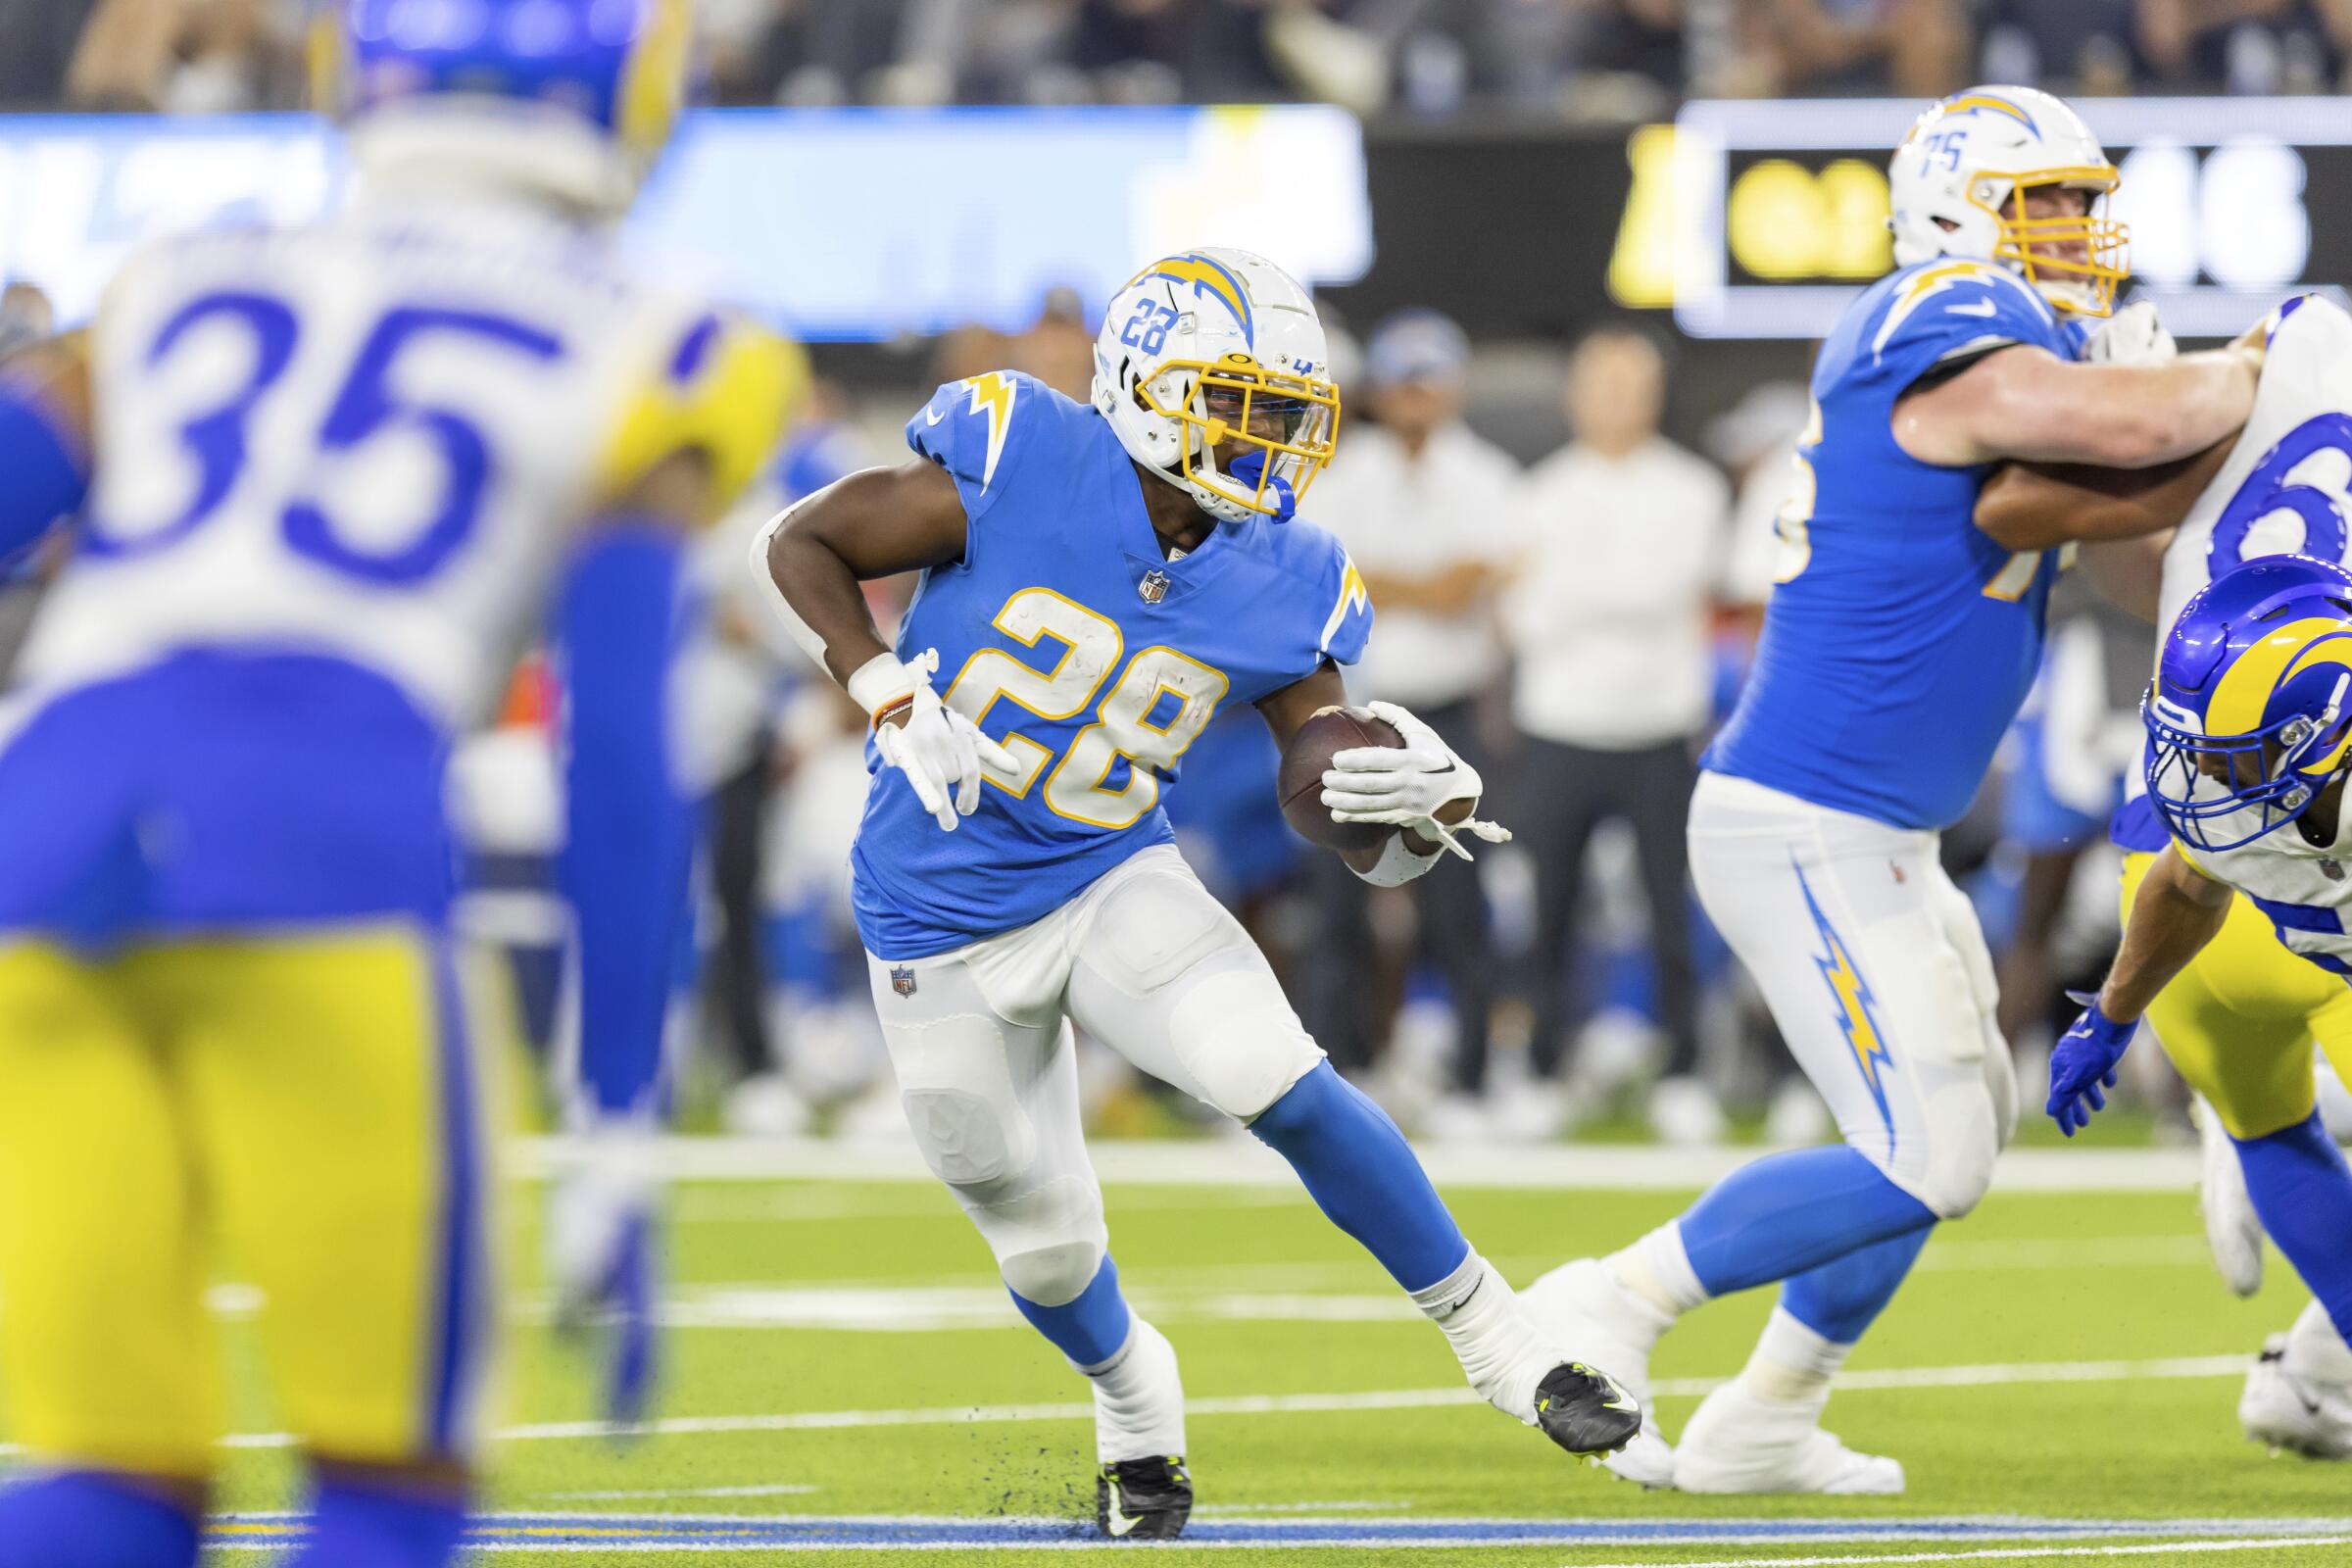 Chargers running back Isaiah Spiller tries to run past the Rams defense.